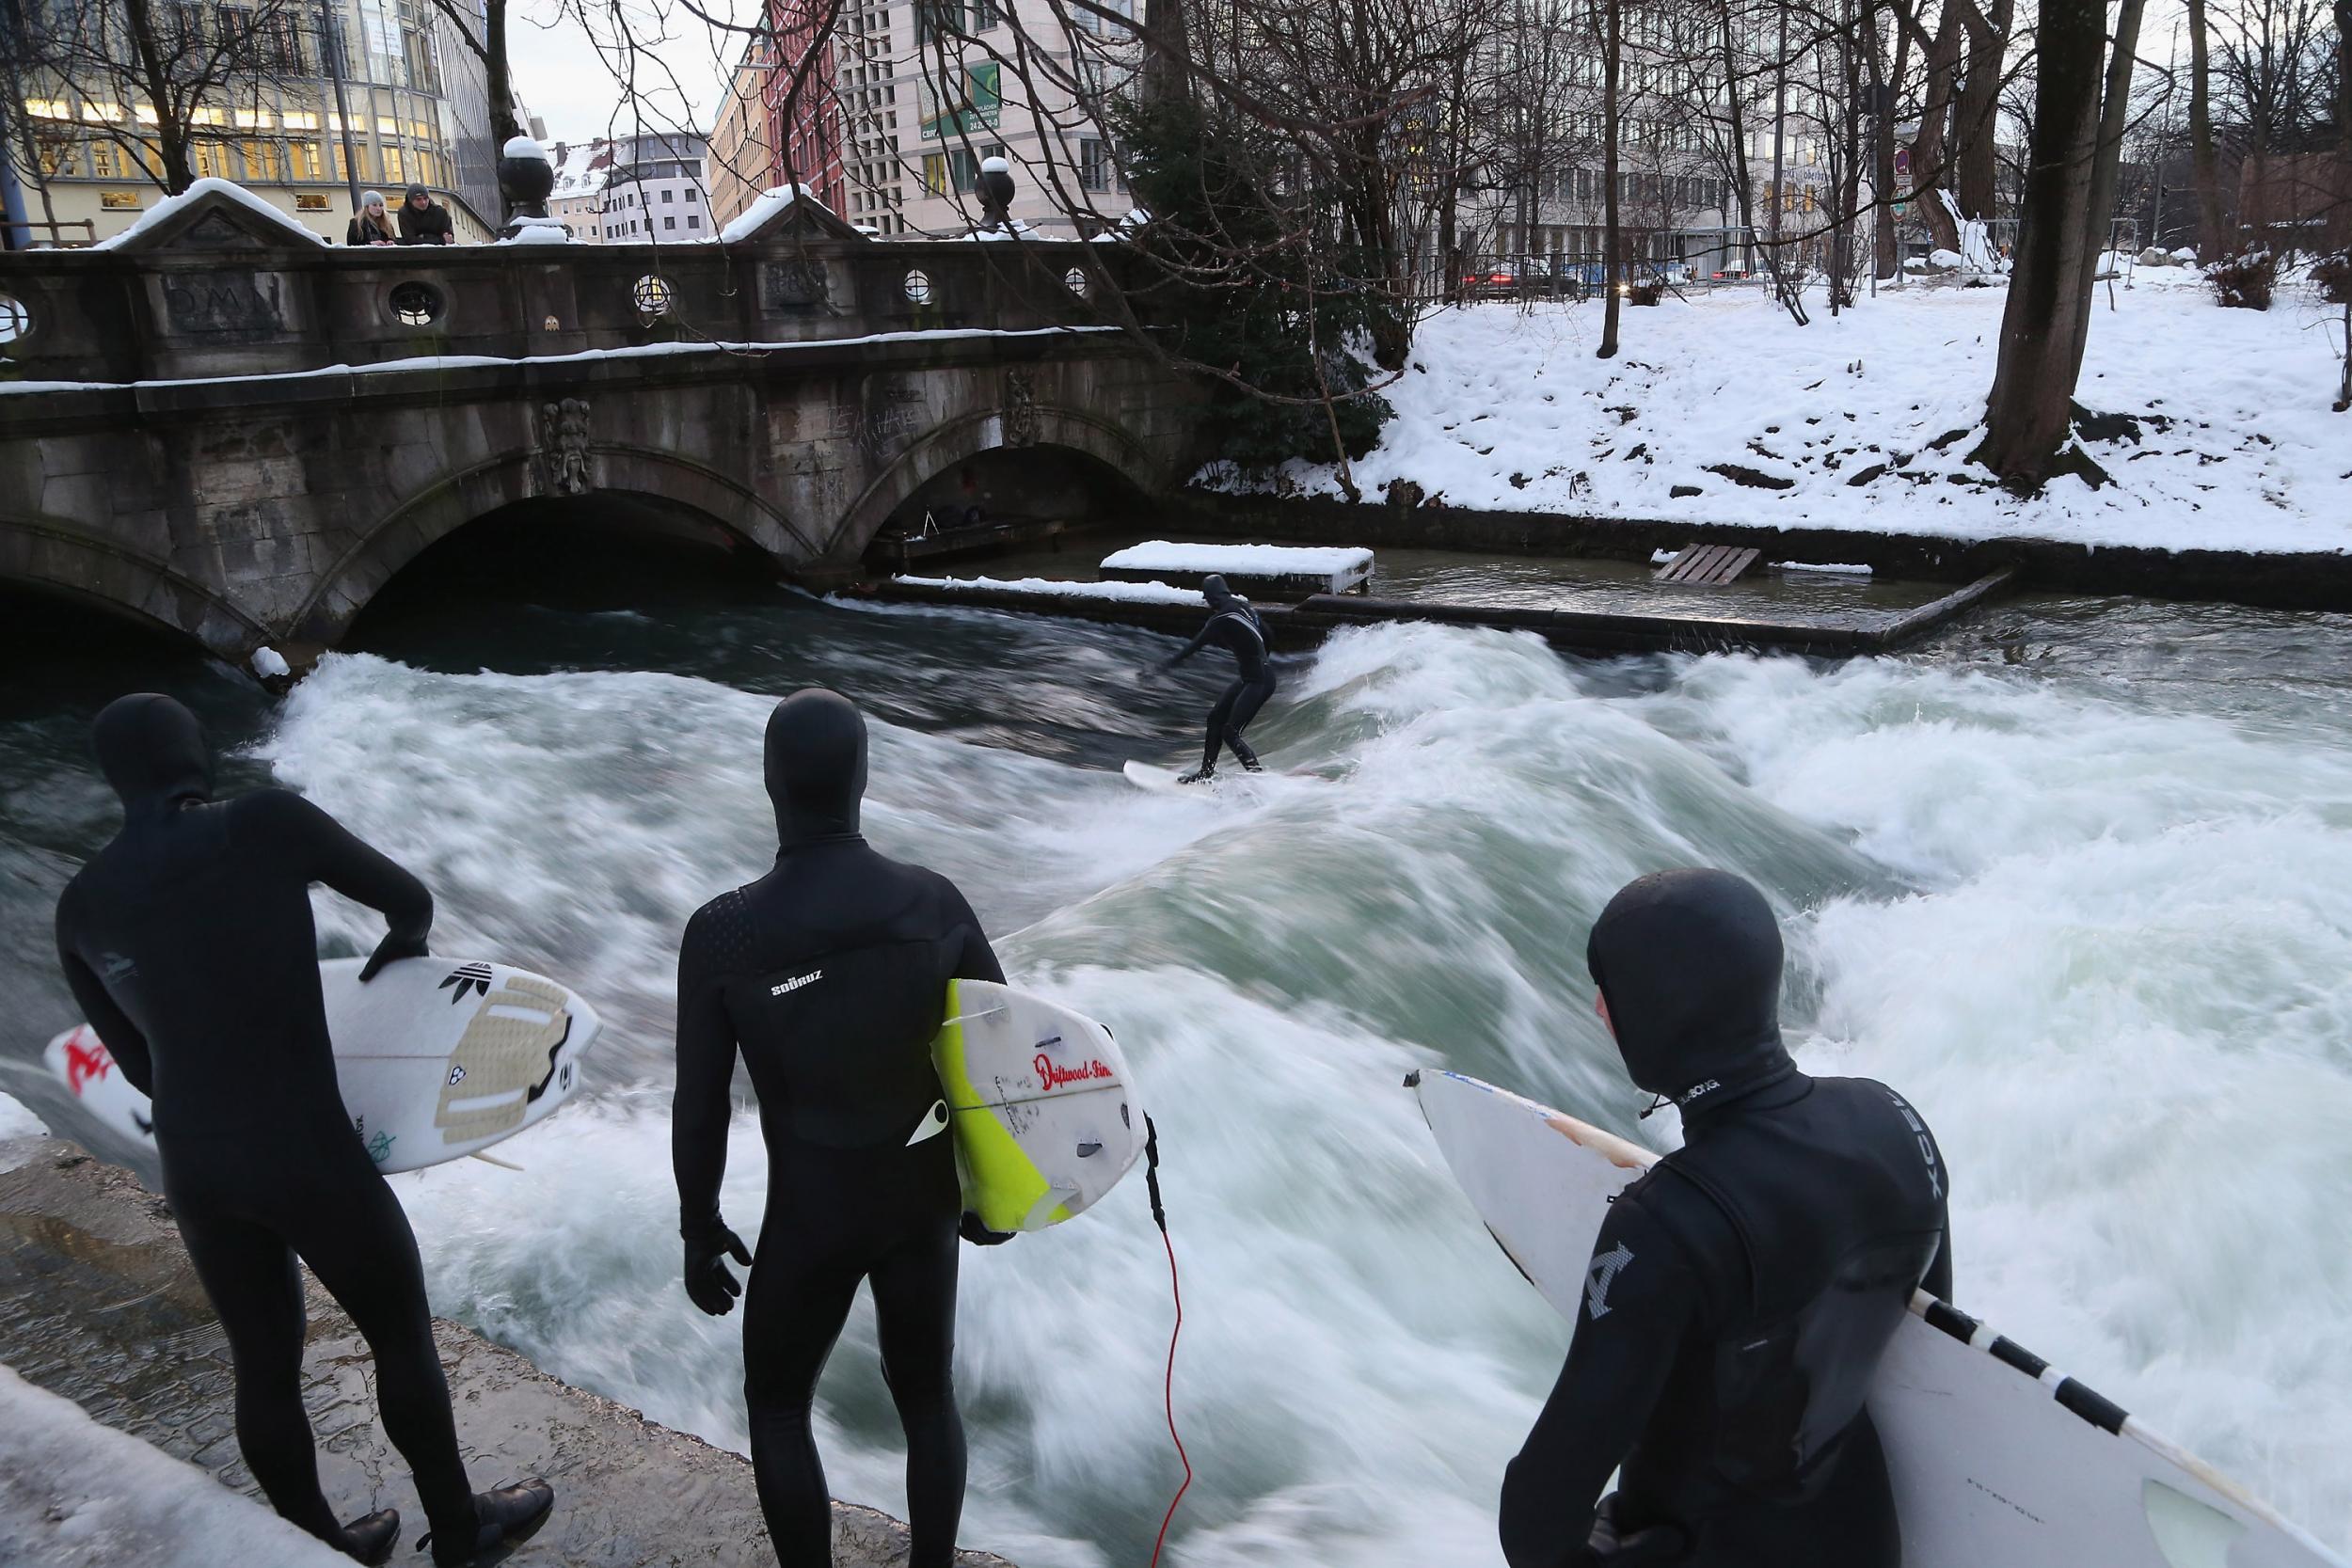 Munich's river surfers take on the wave in the English Garden park whatever the weather – even in snow